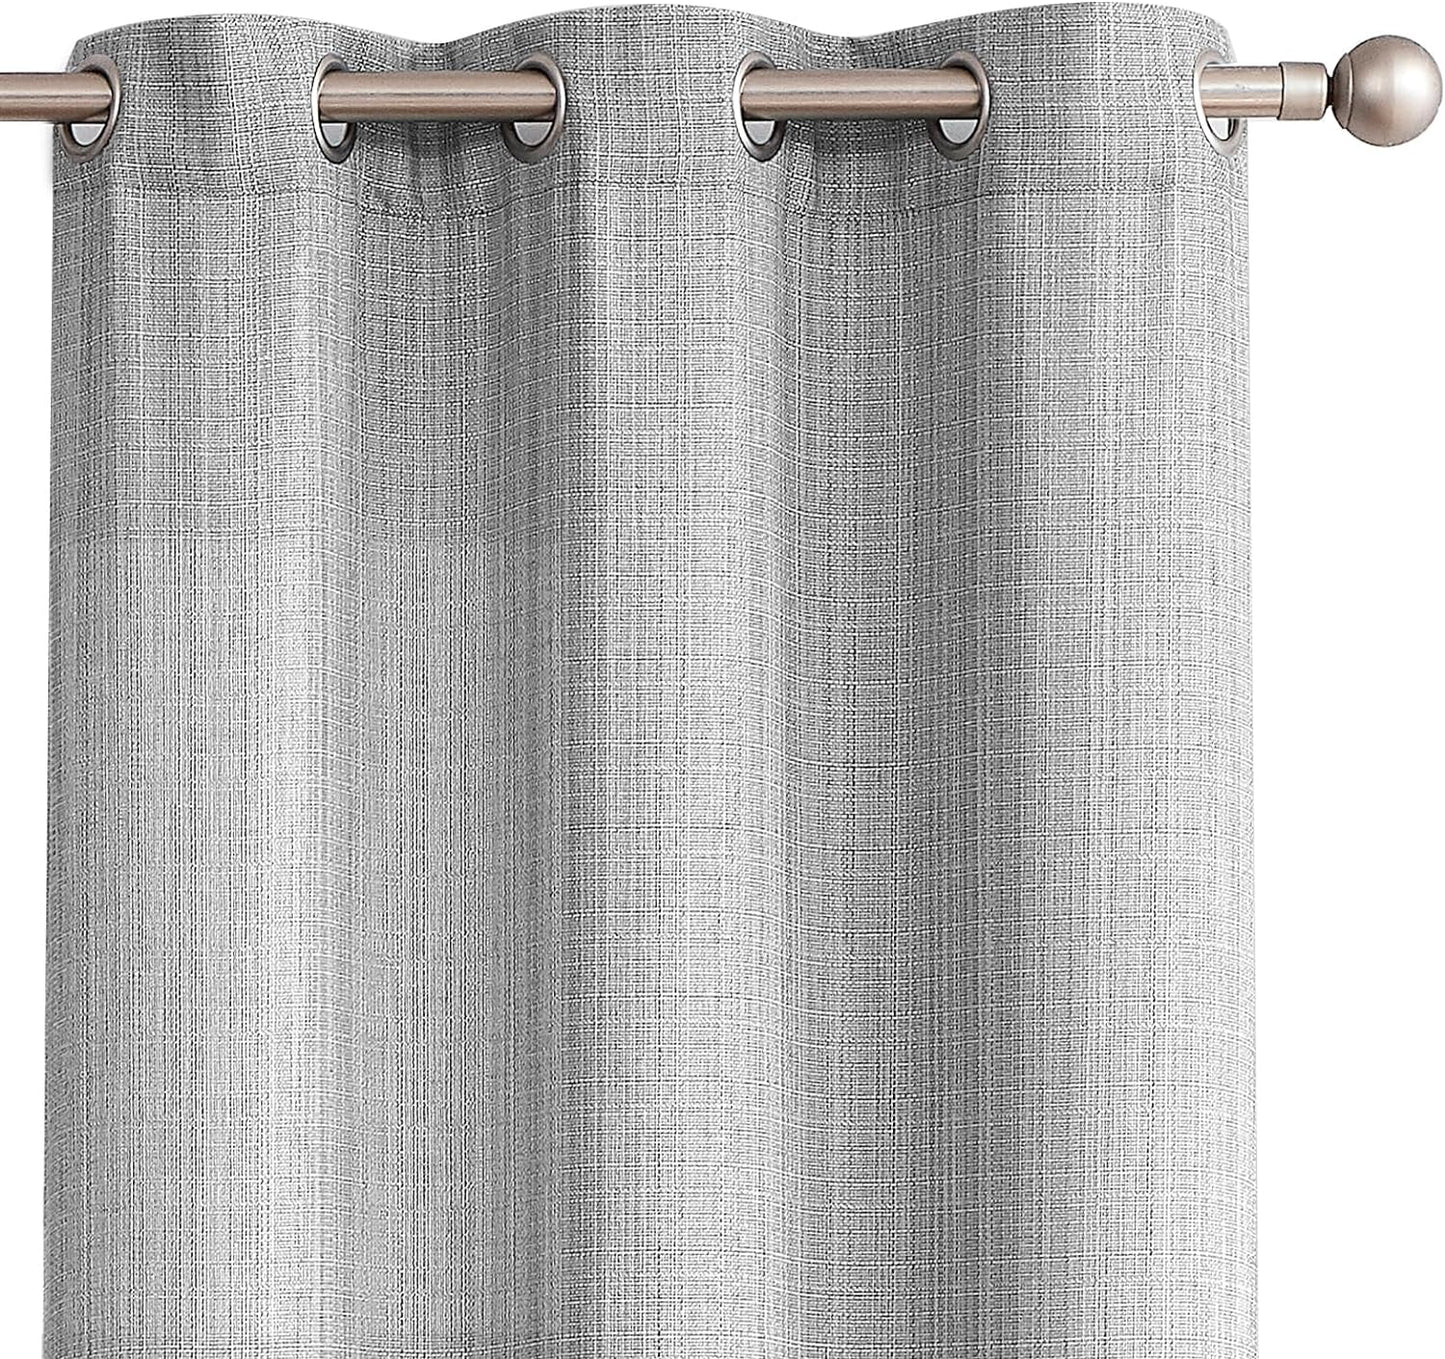 Jinchan Curtains for Bedroom Living Room 84 Inch Long Room Darkening Farmhouse Country Window Curtains Heathered Denim Blue Curtains Grommet Curtains Drapes 2 Panels  CKNY HOME FASHION Grommet Heathered Light Grey 38"W X 84"L 